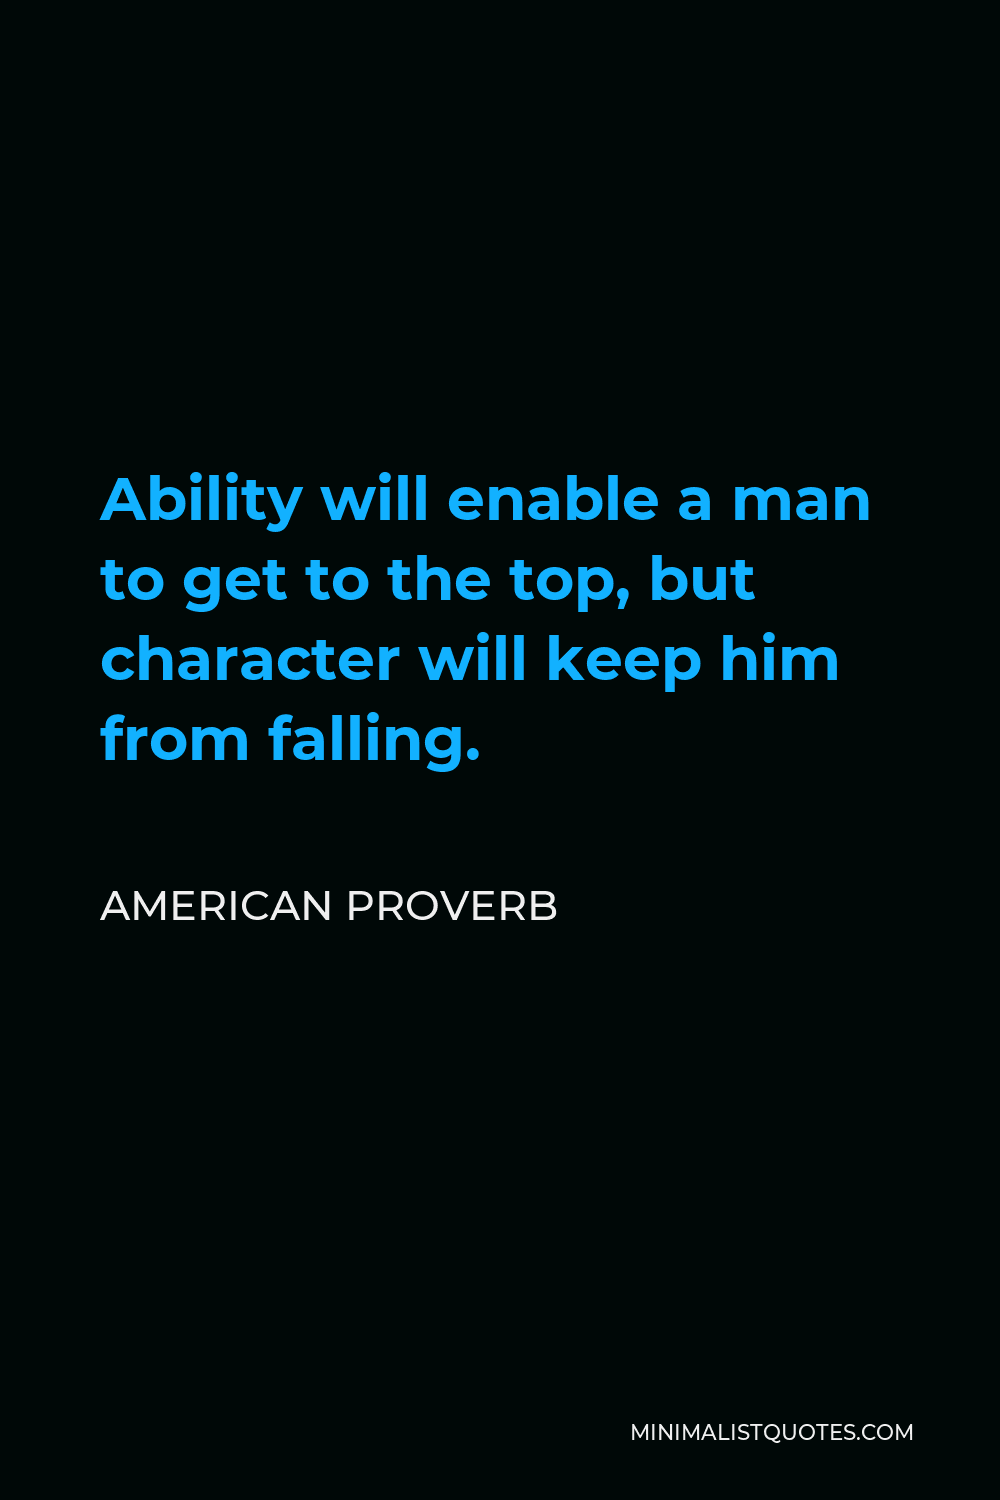 American Proverb Quote - Ability will enable a man to get to the top, but character will keep him from falling.